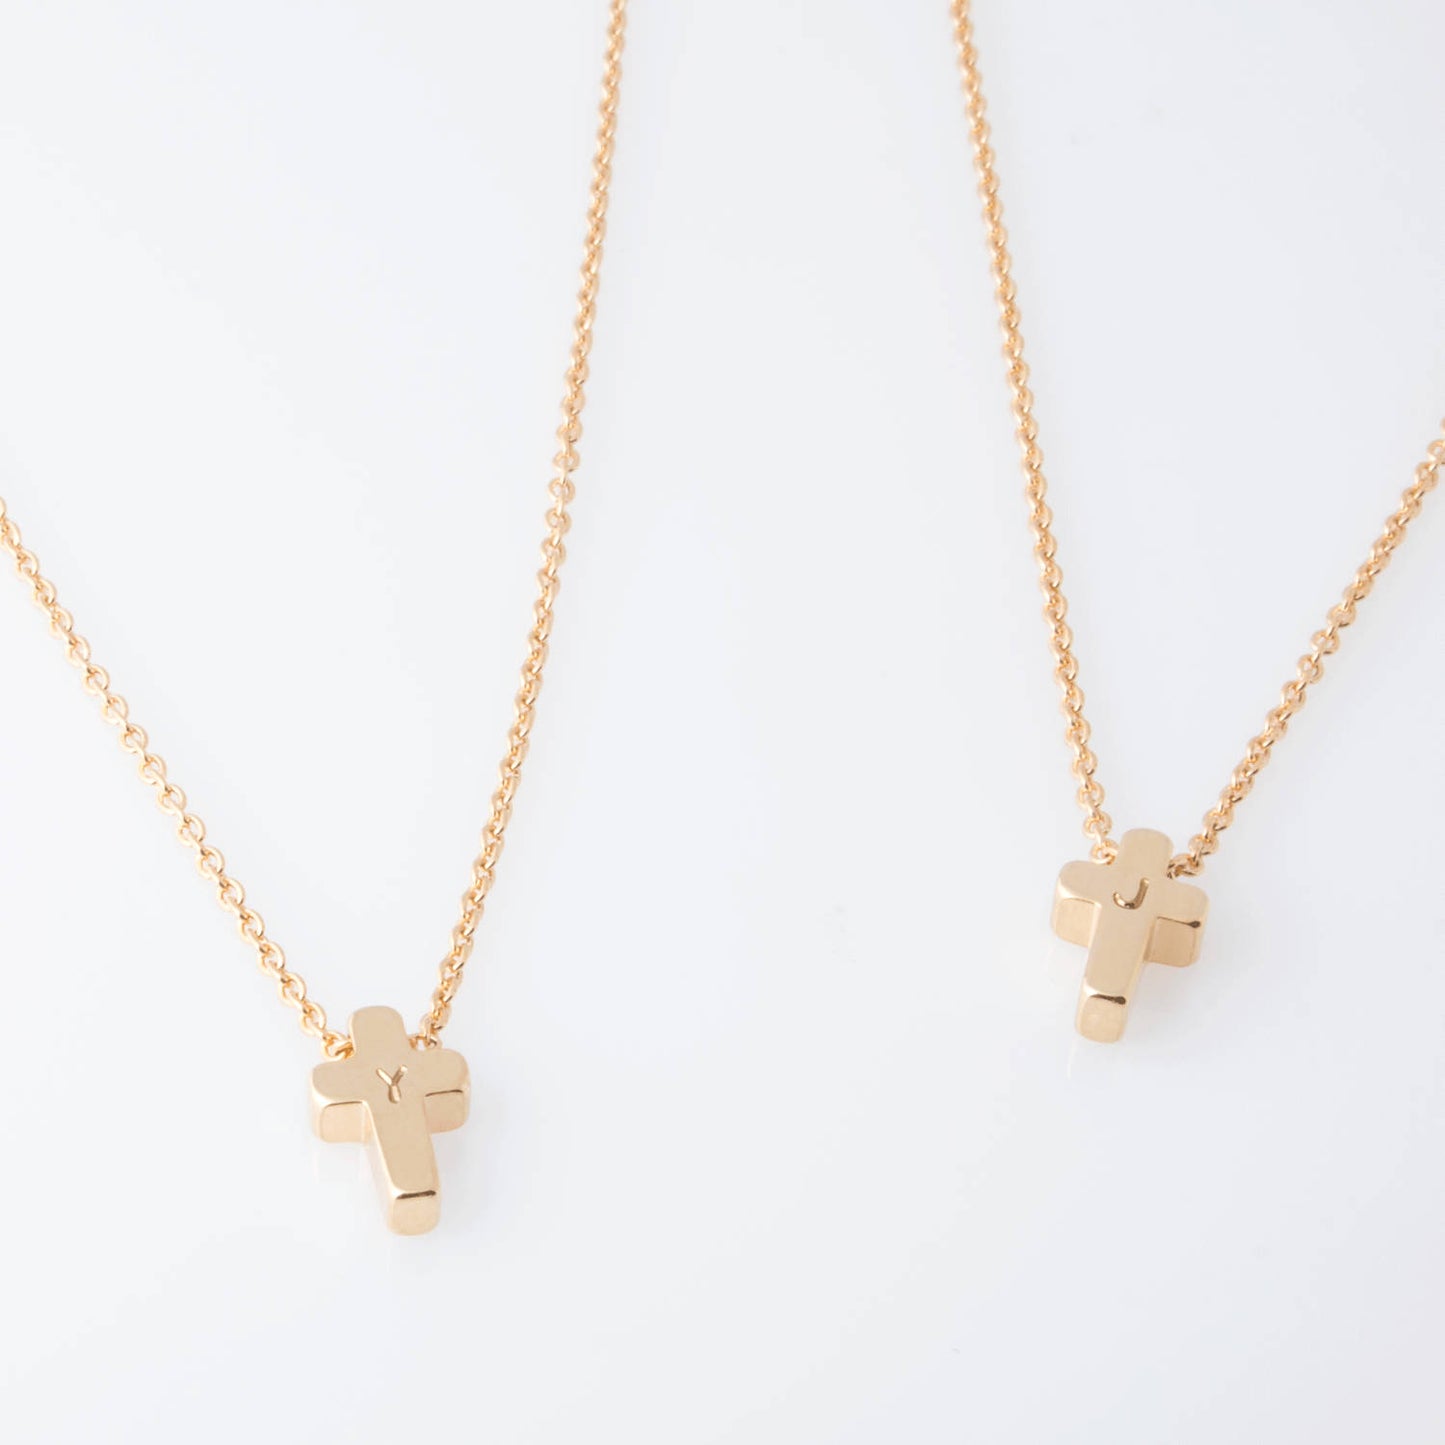 Tiny initial & Cross Necklace - 16K gold plated